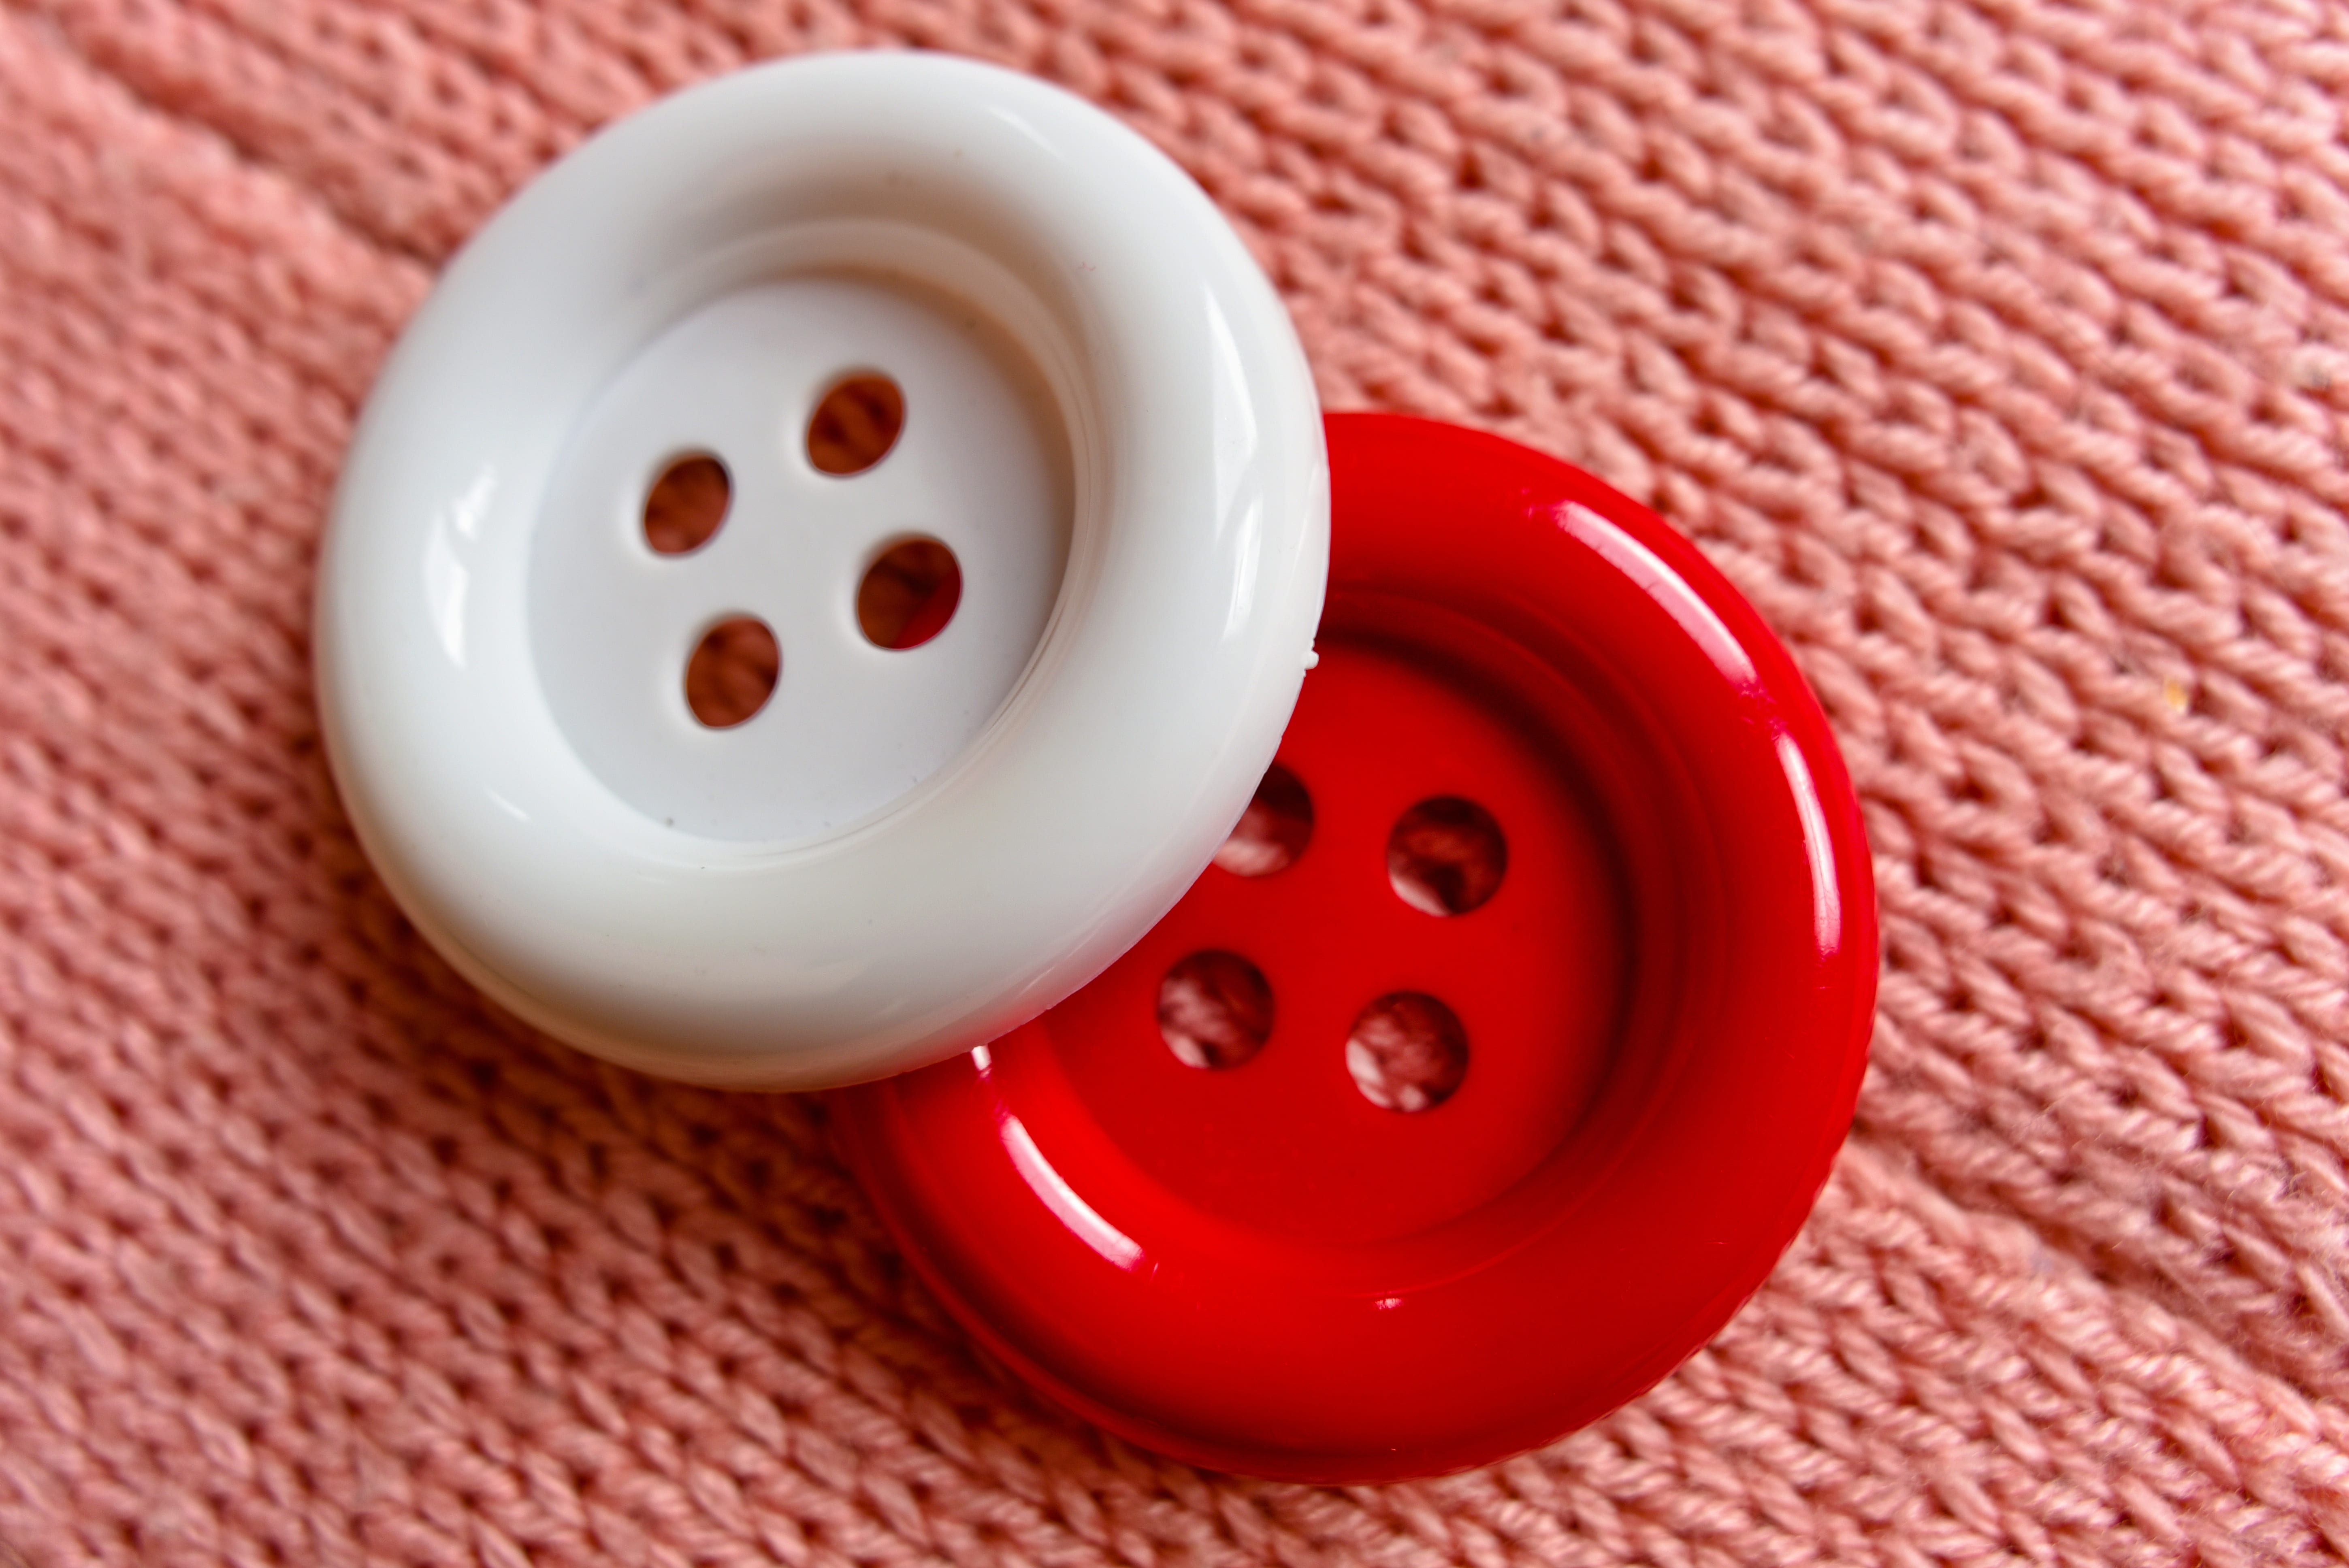 white and red clothes buttons on pink textile, fasten, button hole